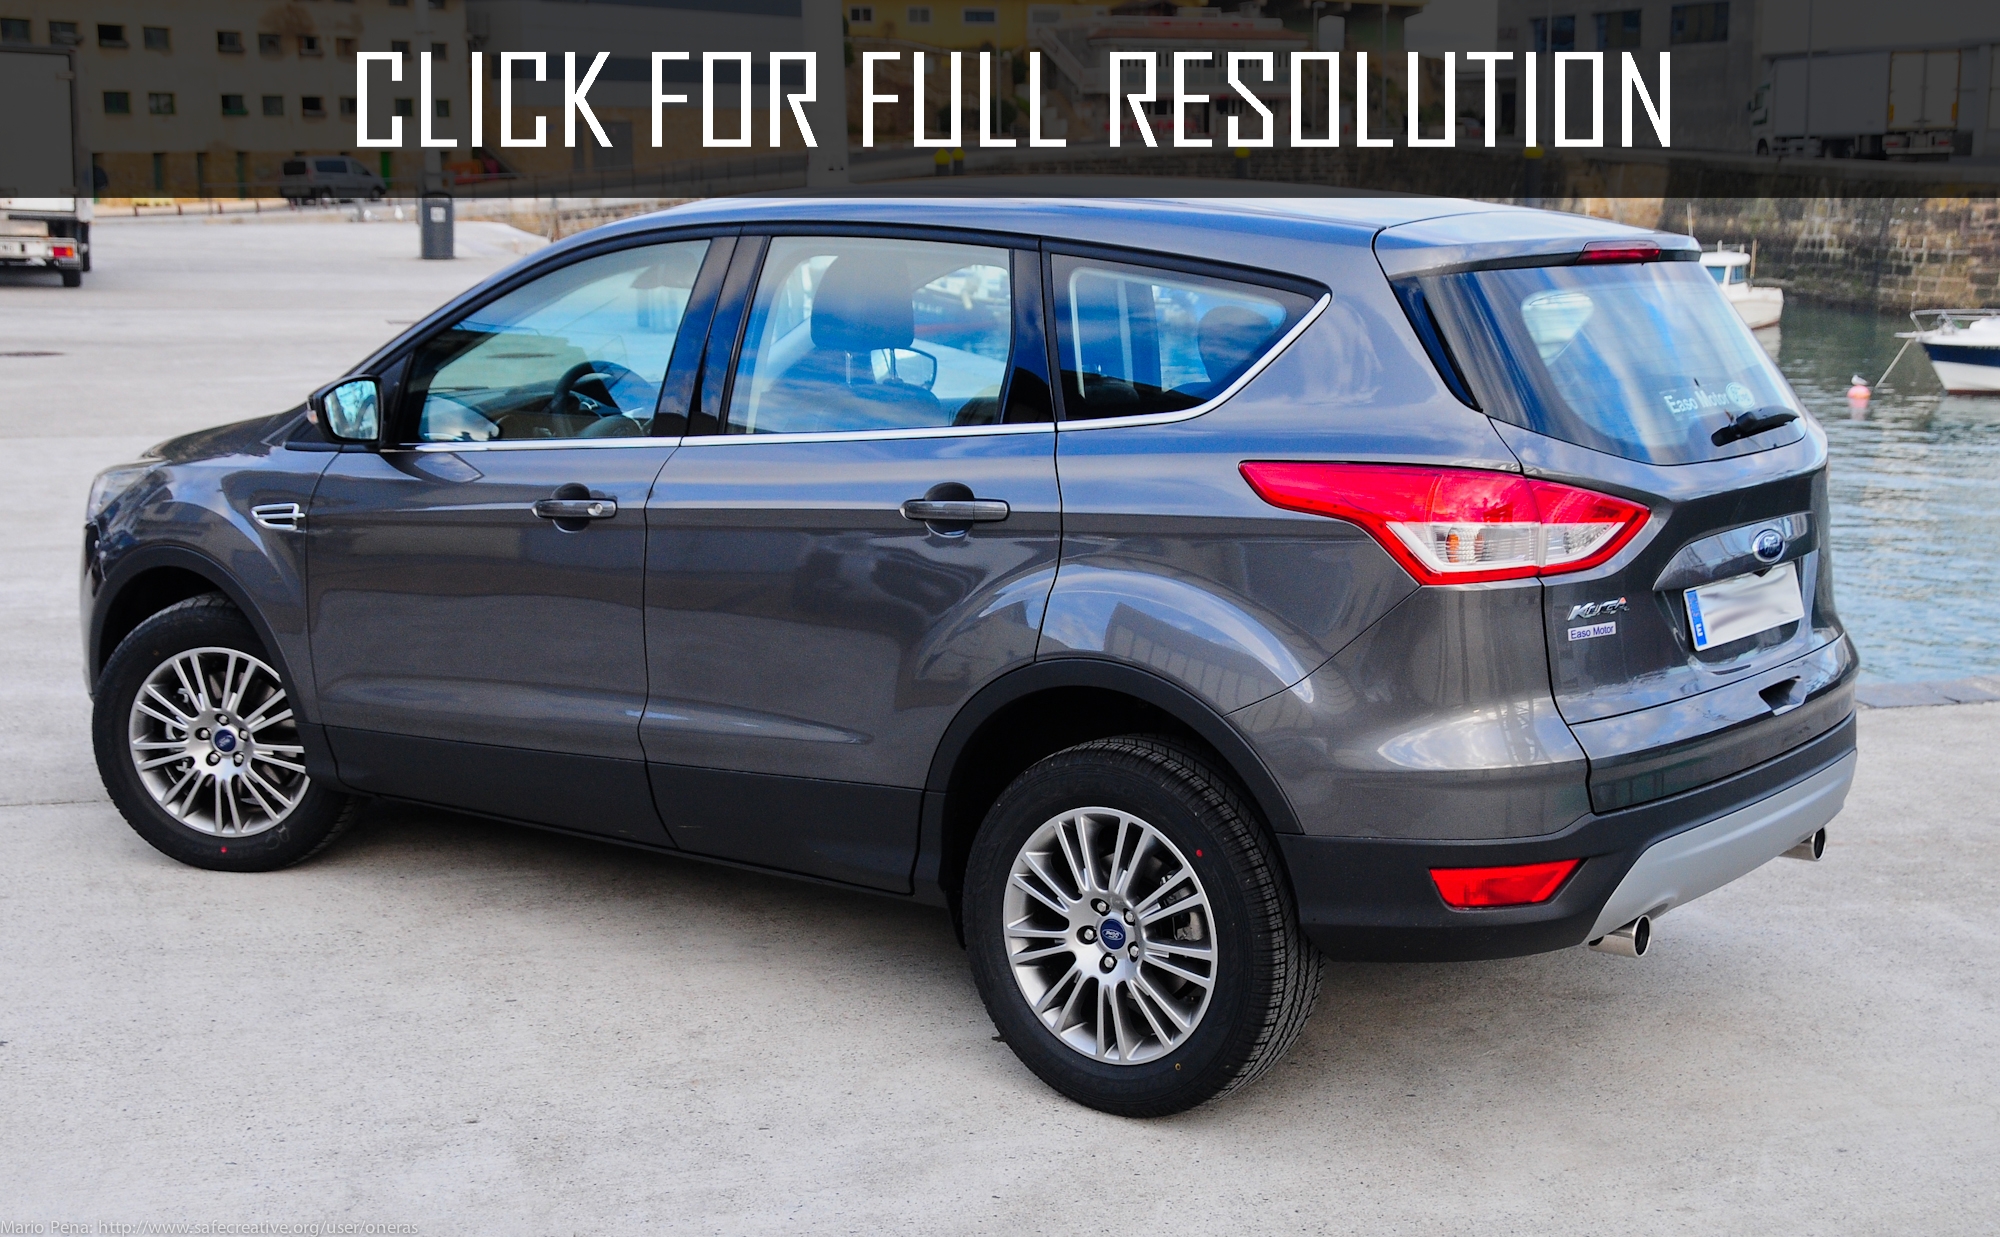 2014 Ford Kuga news, reviews, msrp, ratings with amazing